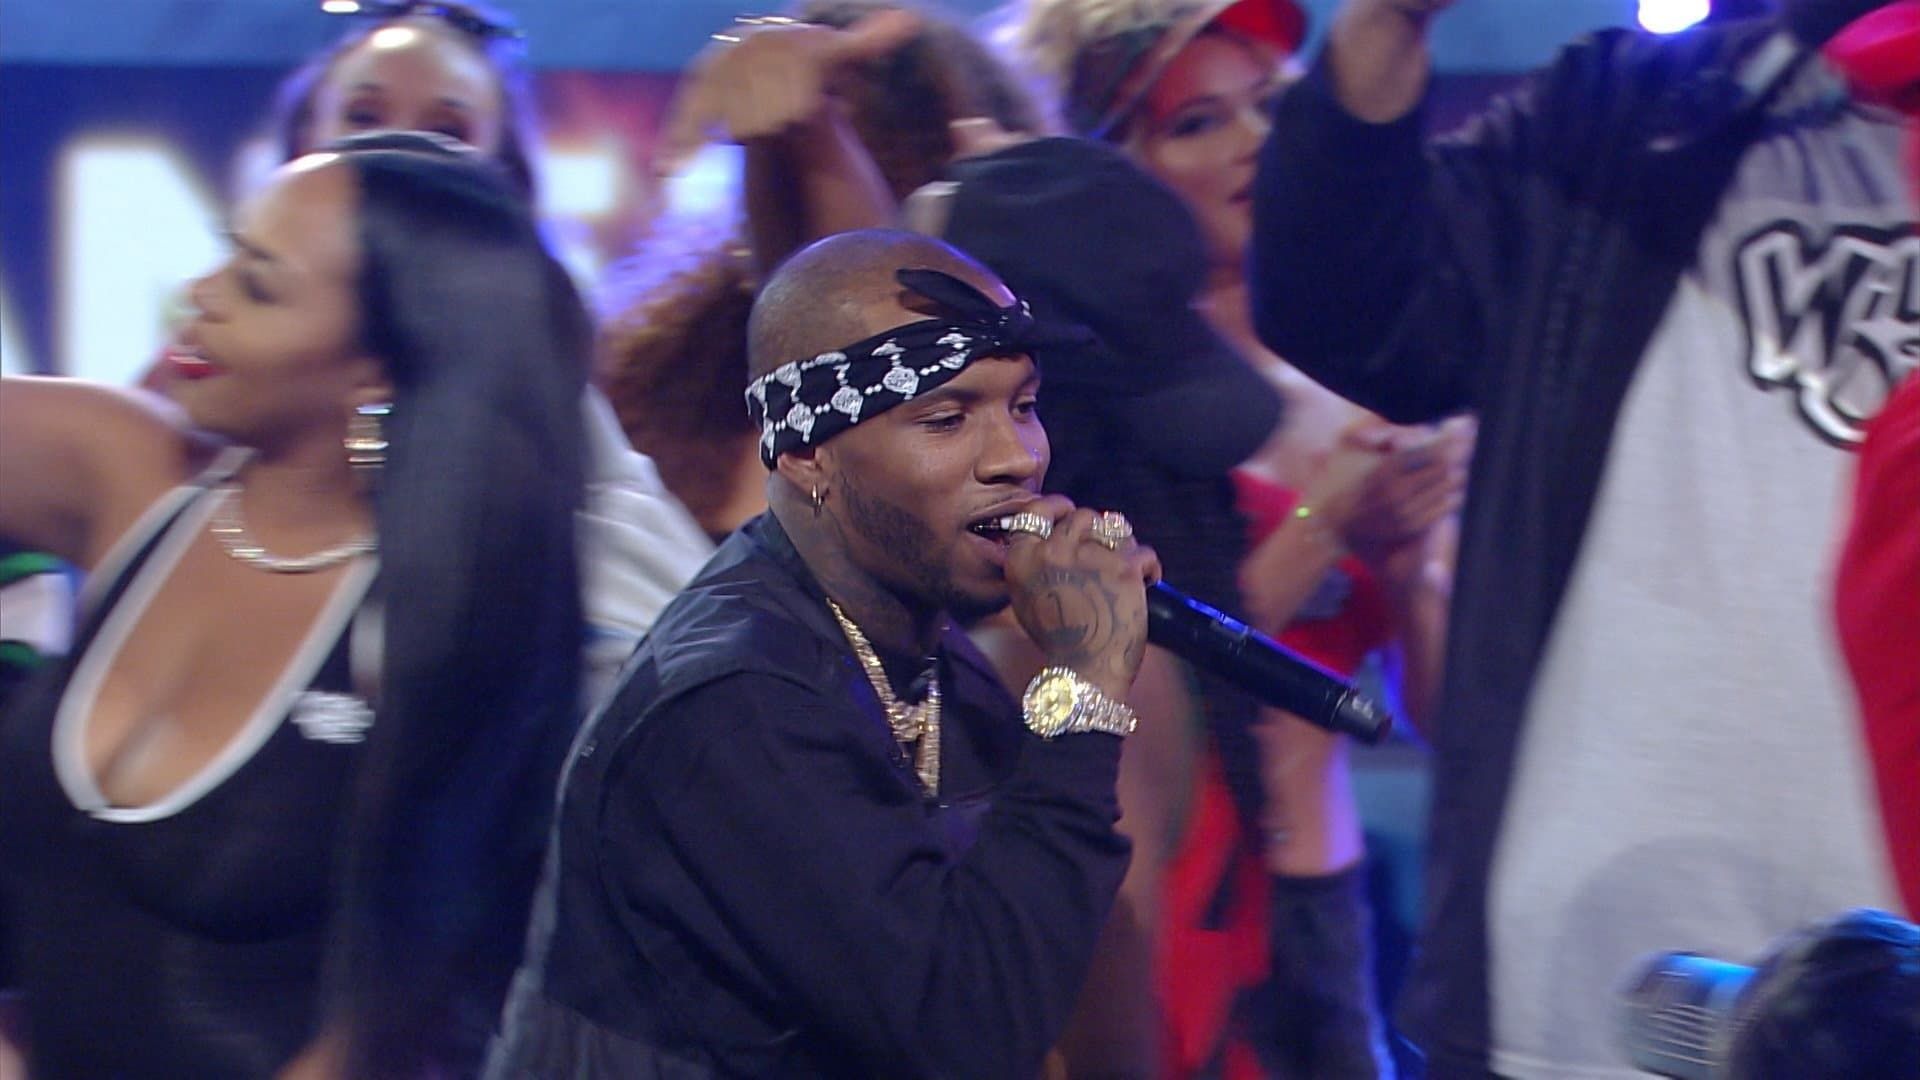 Wild 'N Out background